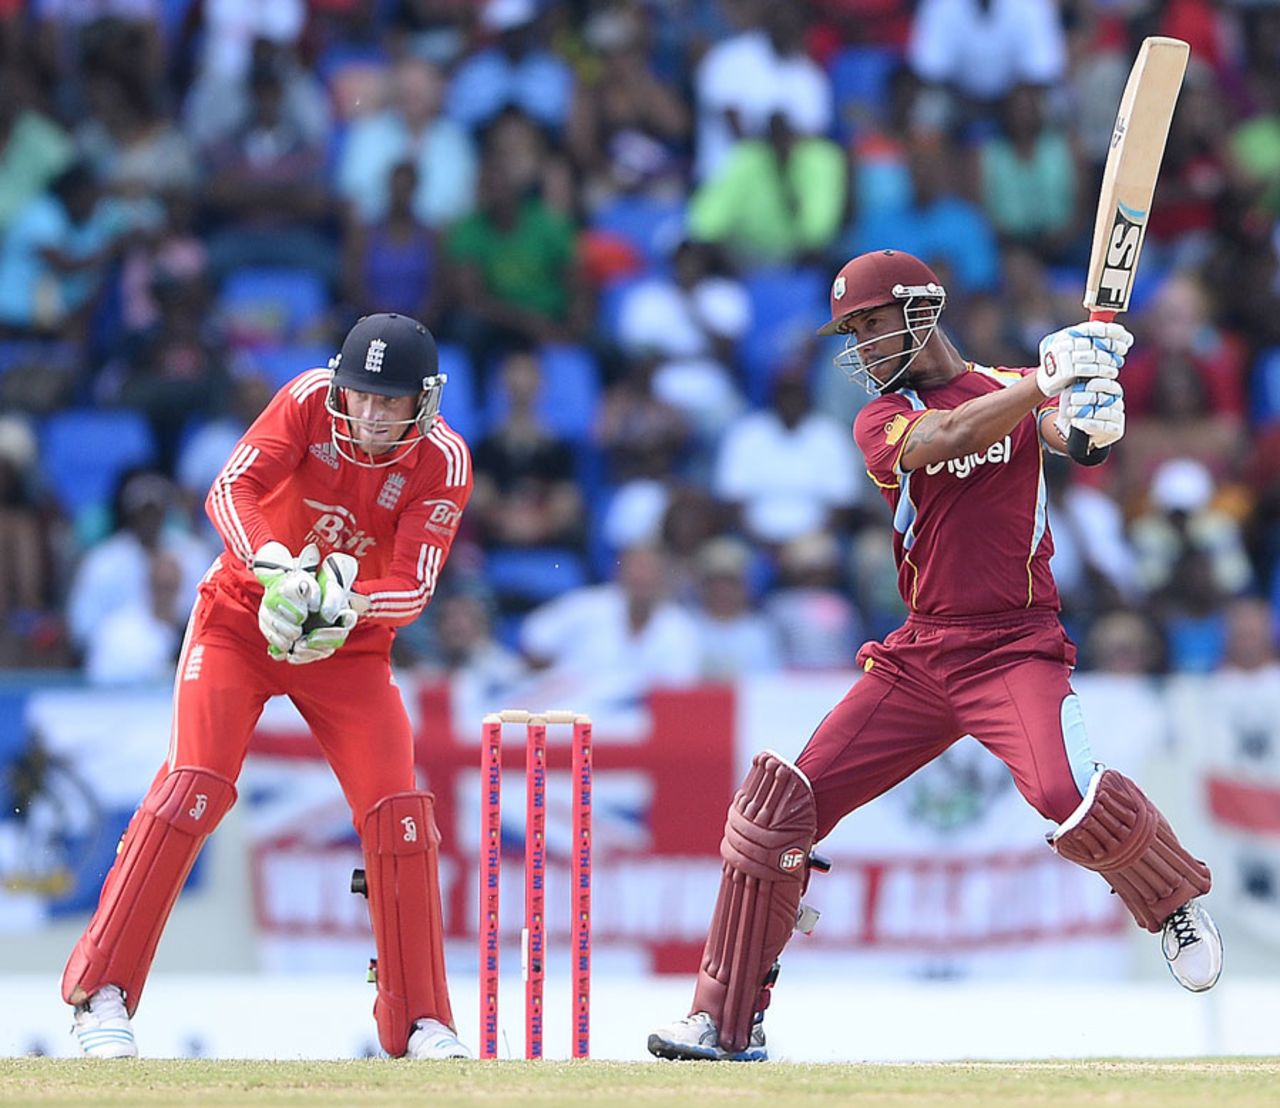 Lendl Simmons was again at the heart of West Indies recovery, West Indies v England, 2nd ODI, North Sound, March 2, 2014